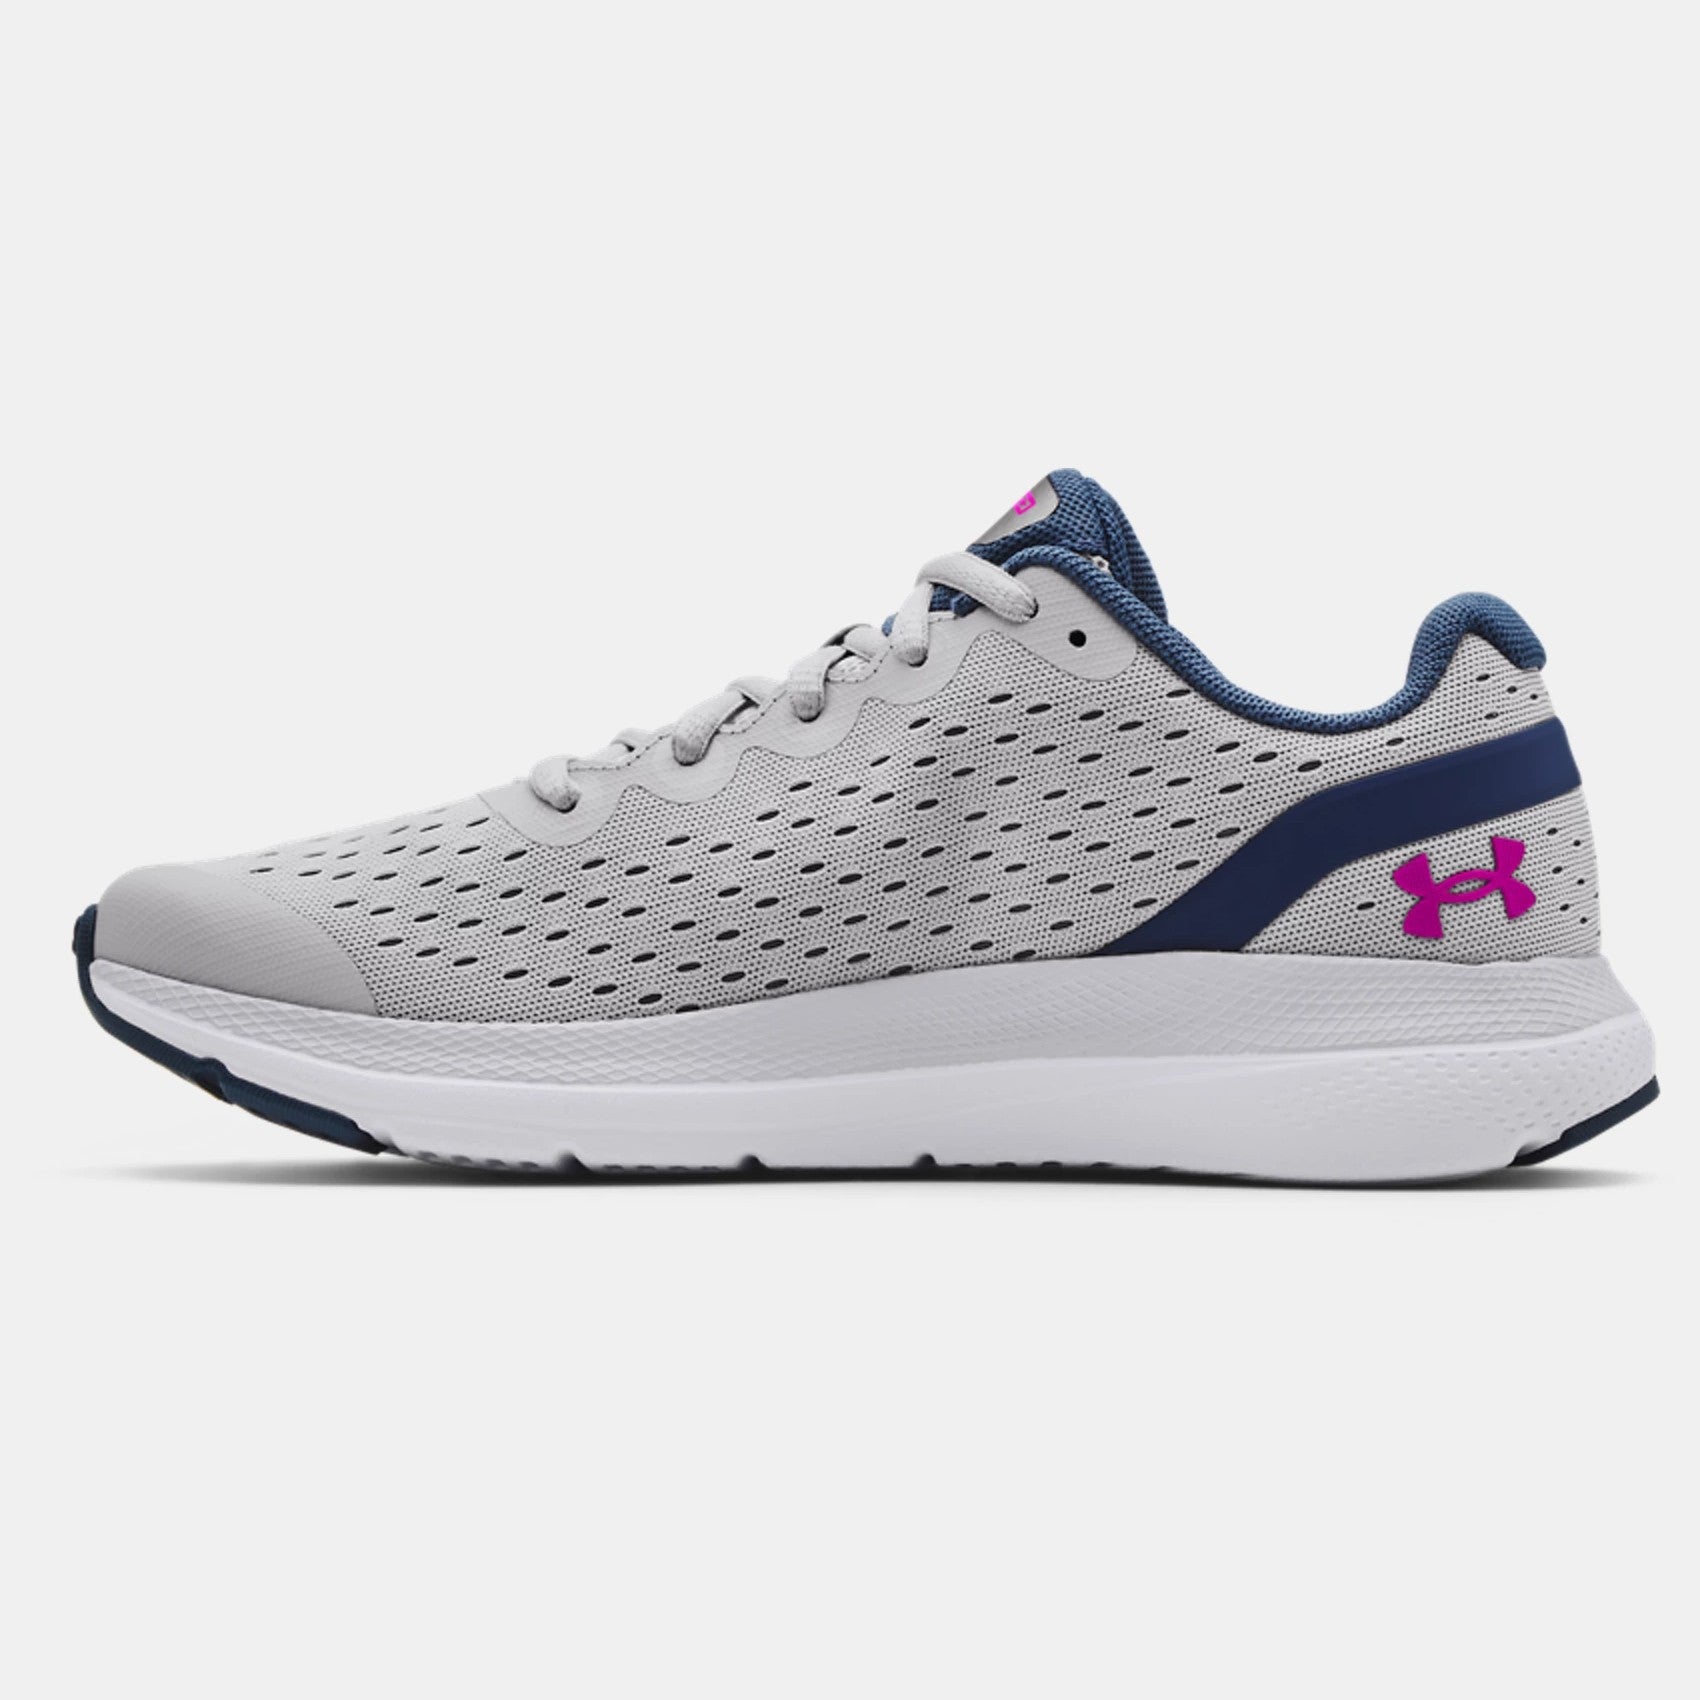 Under Armour Men's Fitness Shoes, Grey (Wire/Halo